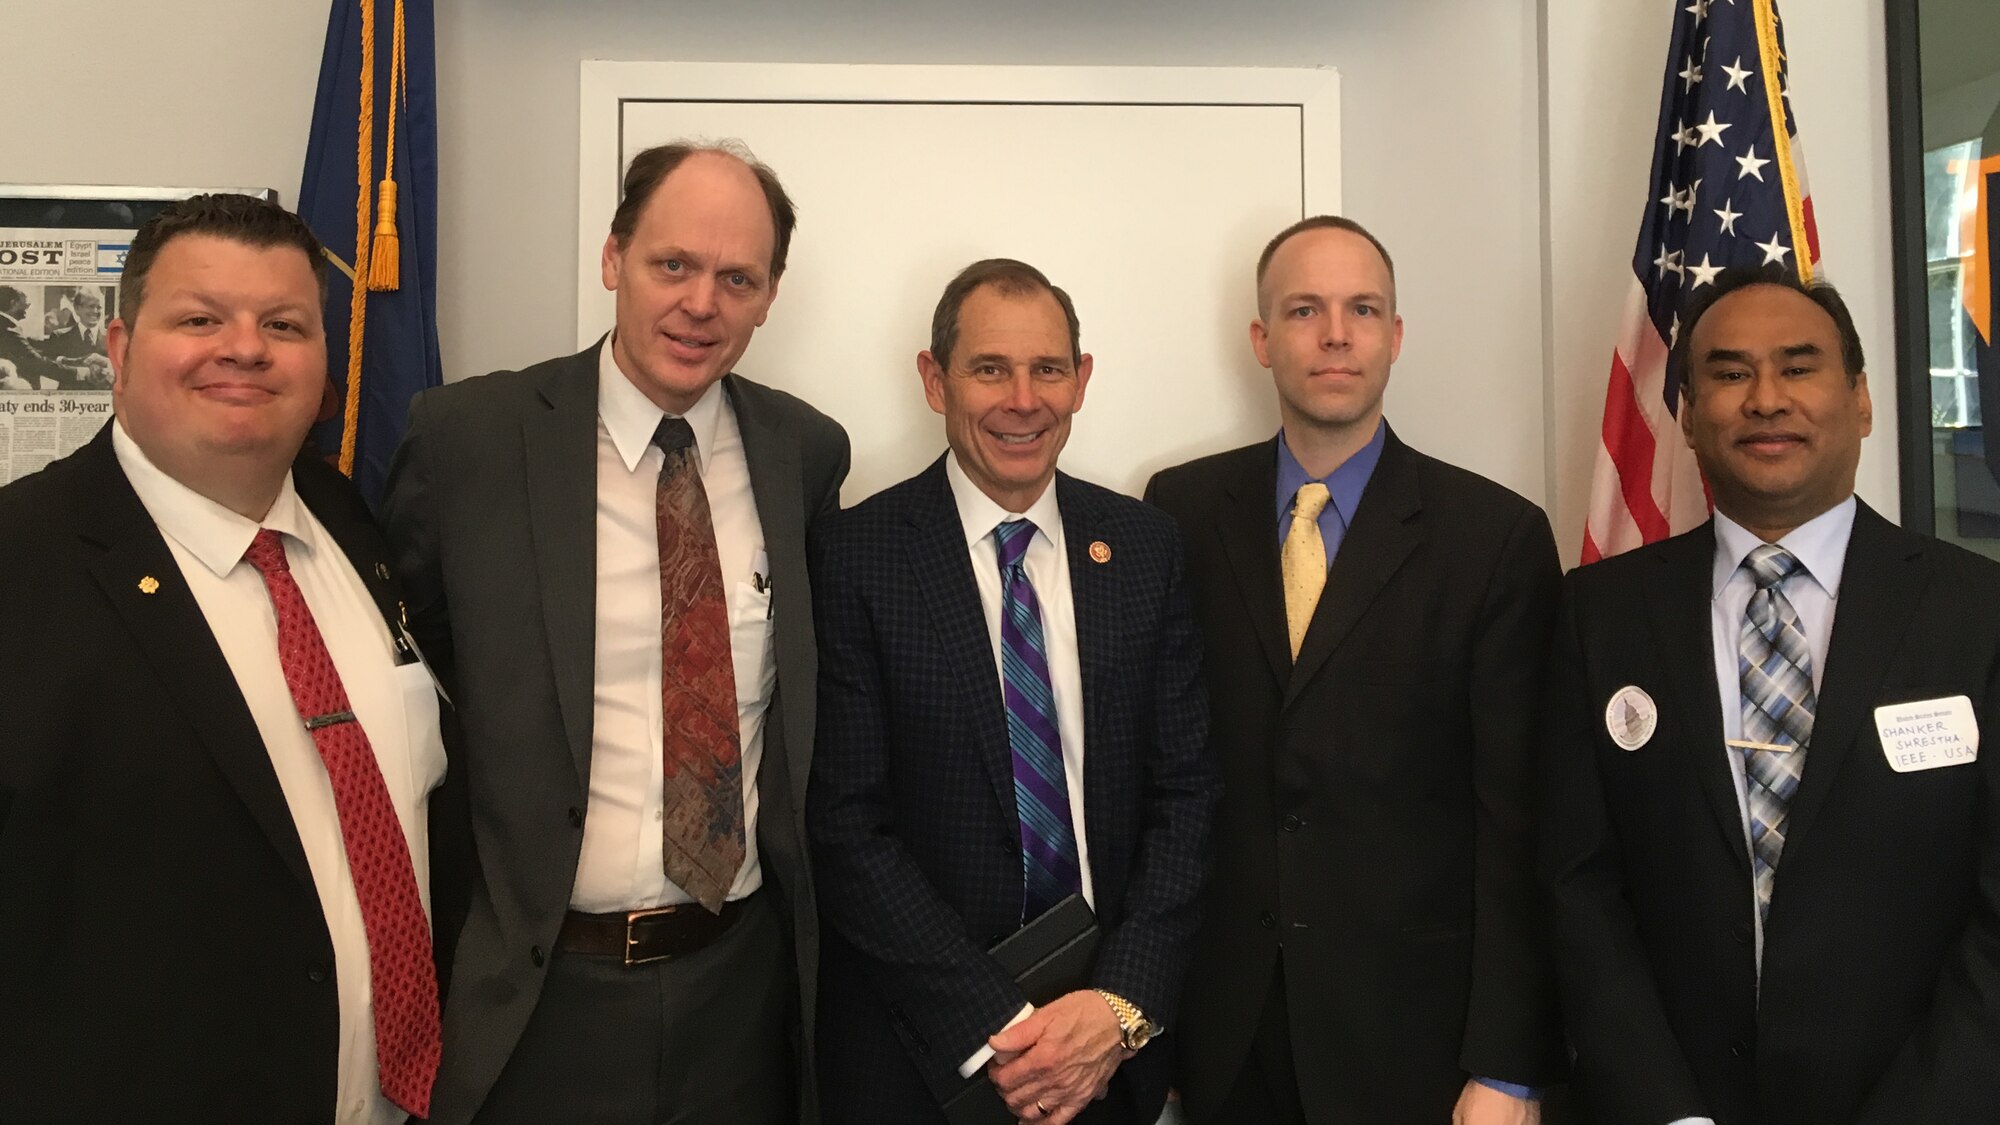 Forrest Brown (second from left), and other members of the Institute of Electrical and Electronics Engineers professional organization, met with Utah’s U.S. Rep. John Curtis (center) in Washington D.C. April 3, 2019. The group discussed issues important to the economy and ways for the nation to stay ahead of world competition. (Courtesy photo)